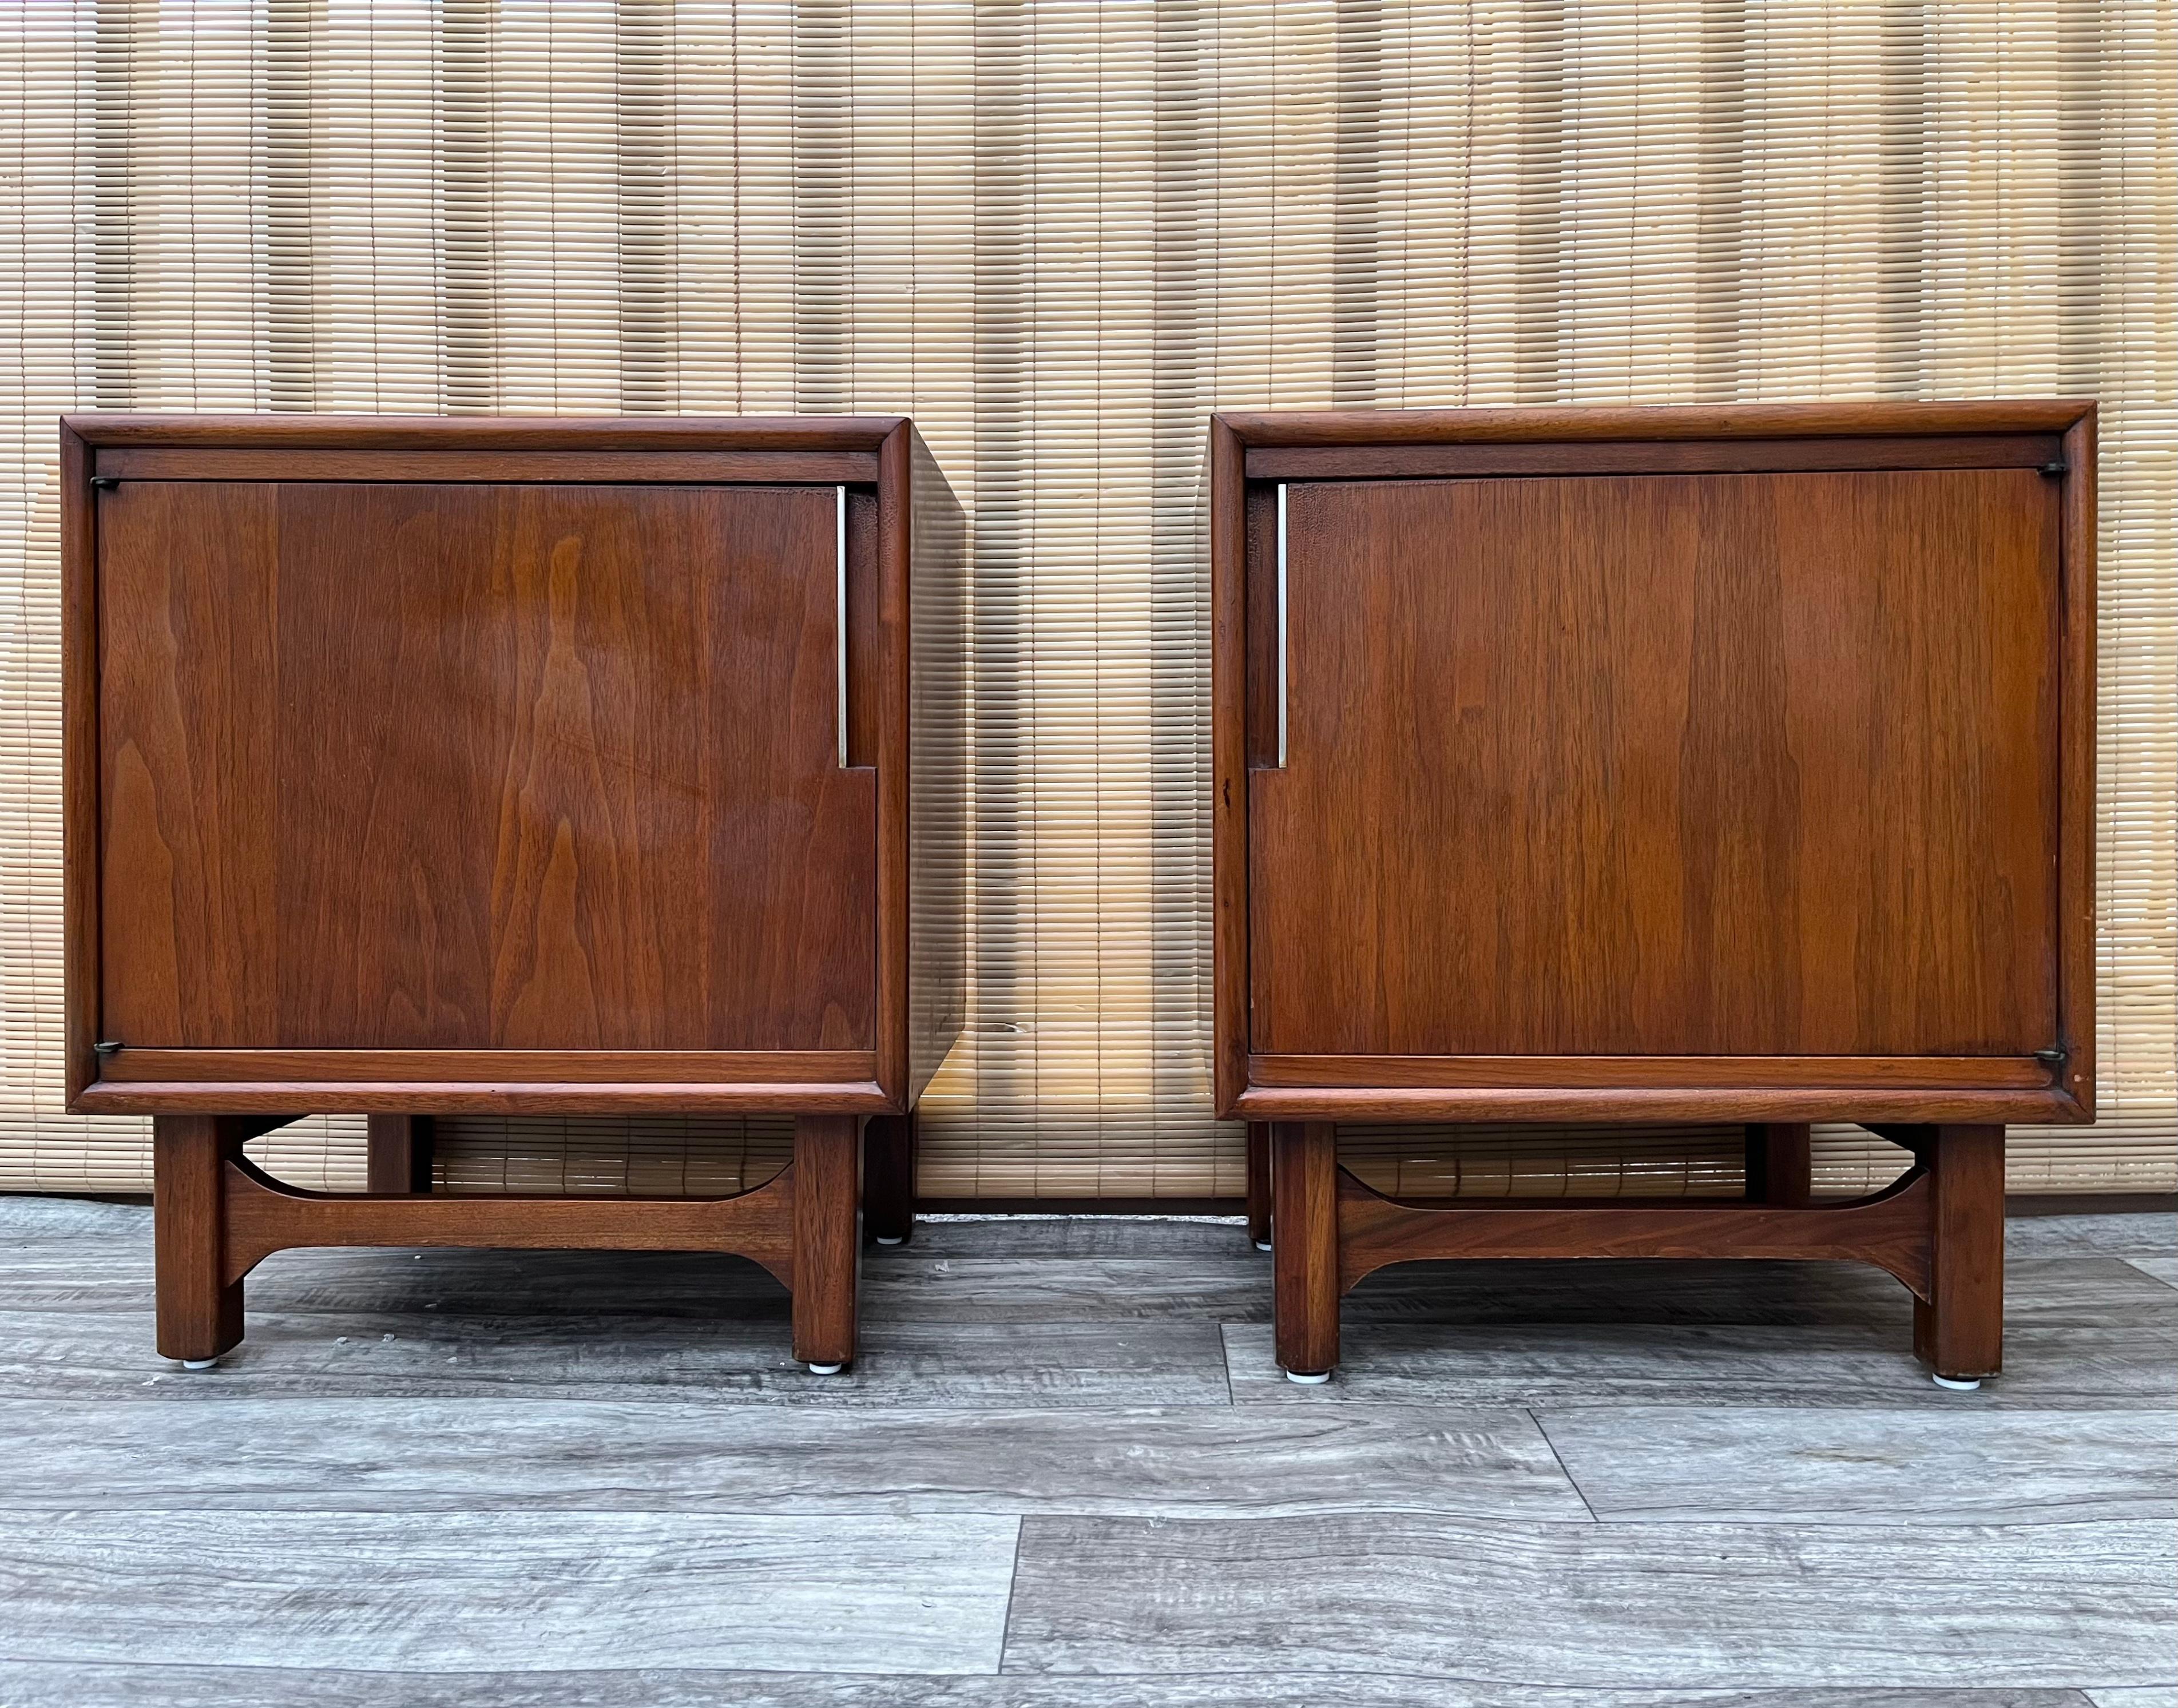 A pair of 1960s Mid-Century Modern Nightstands by Cavalier Furniture. Dated 1967.
Features a quintessential sleek Mid-Century Modern Design with a beautiful dark walnut wood grain, brass hardware and plenty of storage space, with a pullout surface